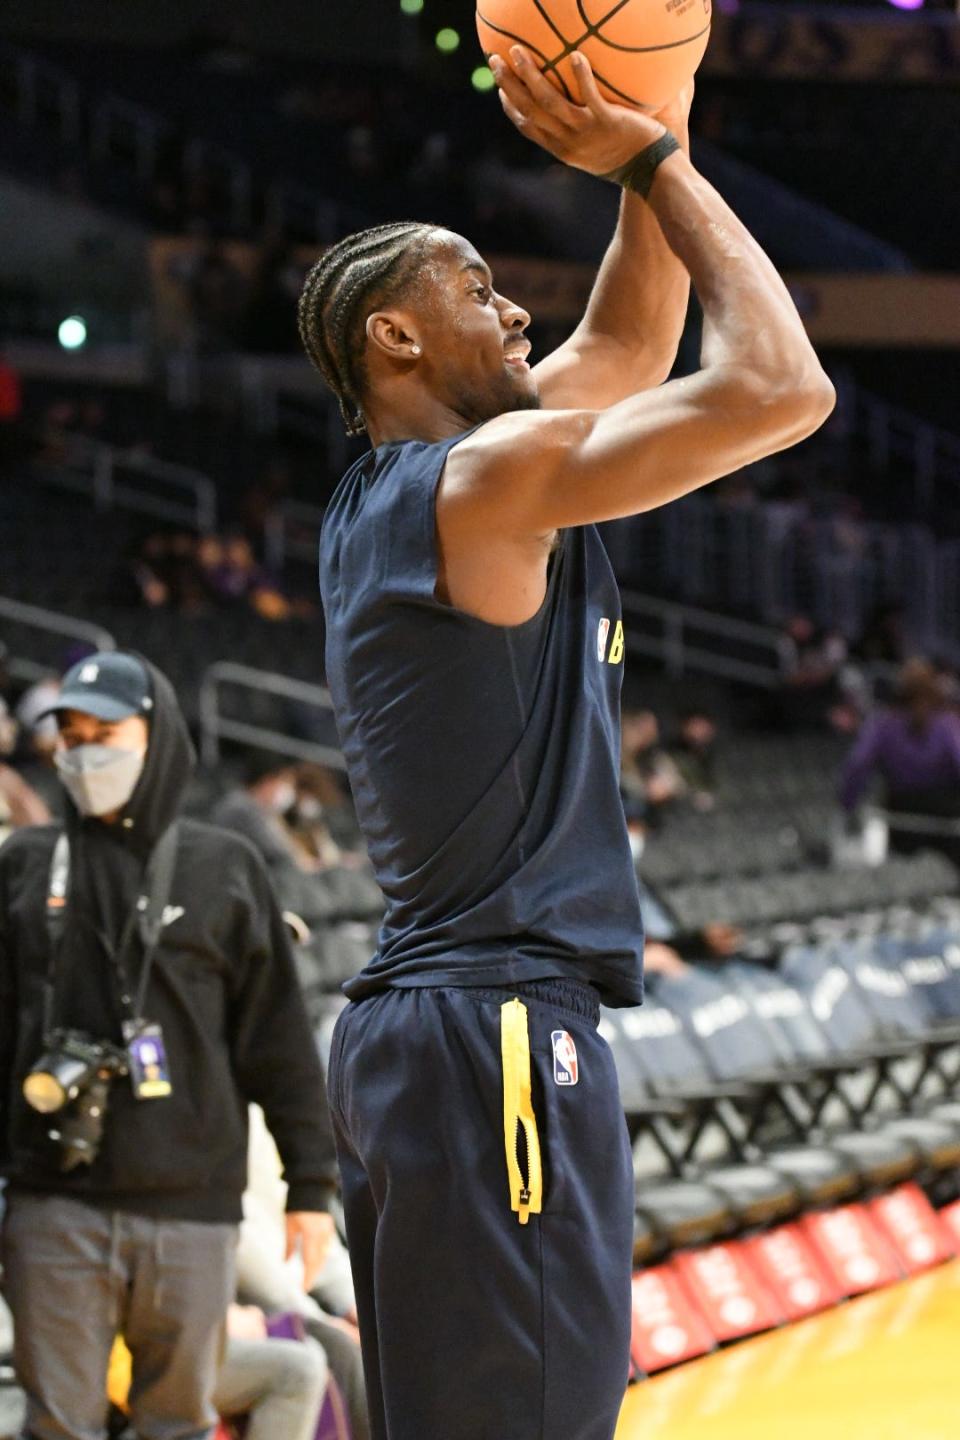 Indiana's Caris LeVert shoots during warmups as the Lakers host the Pacers at Crypto.com Arena in Los Angeles on Jan. 19, 2022.